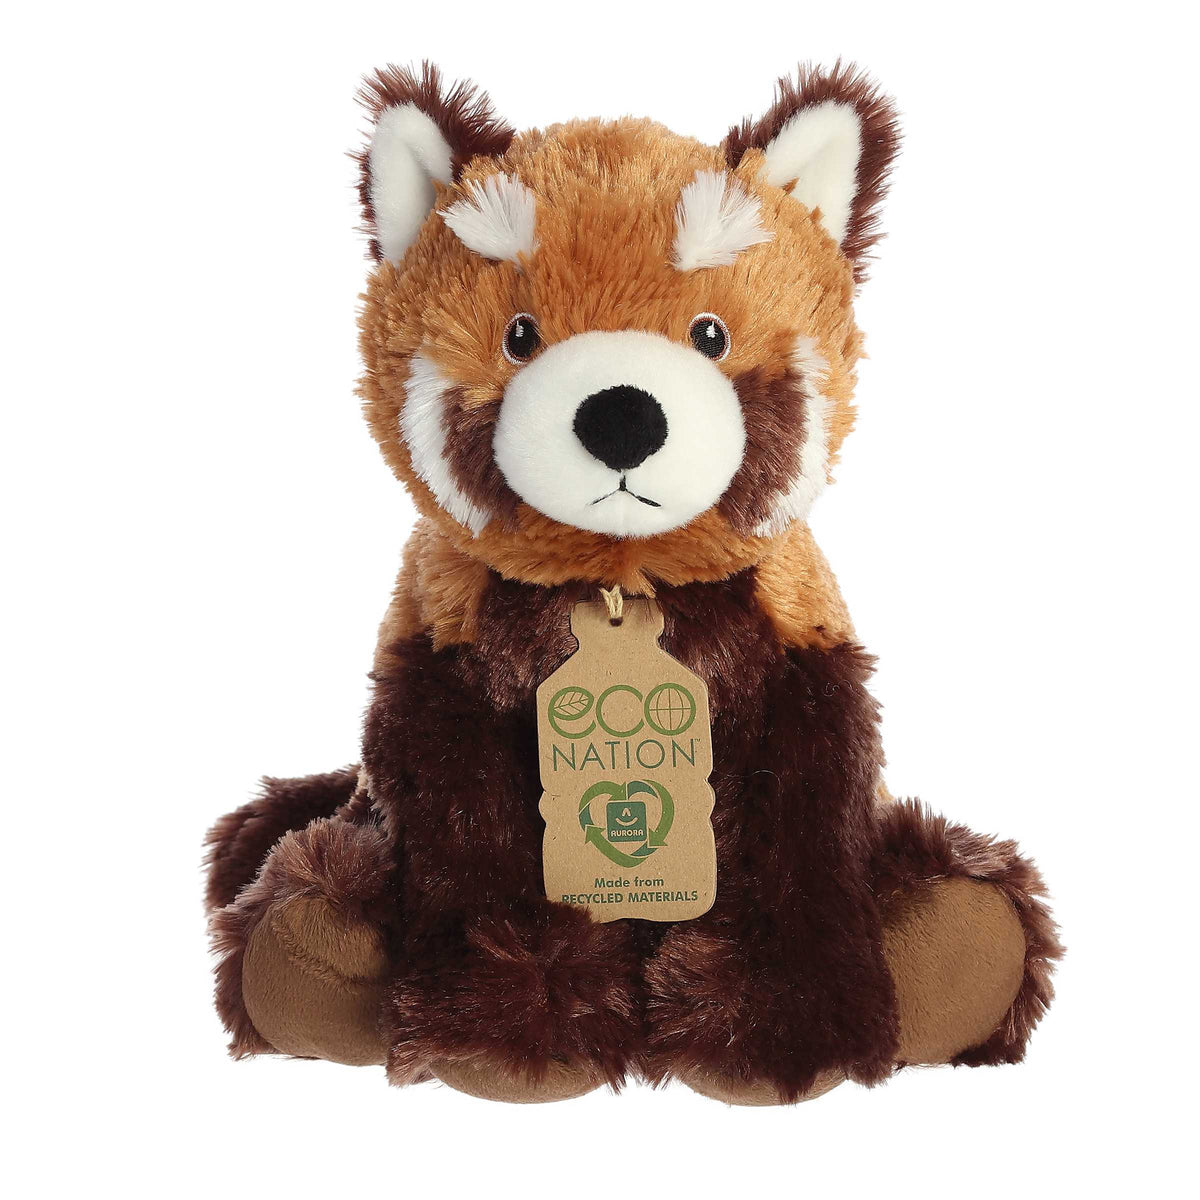 Eco Hugs Red Panda by Aurora, with reddish-brown fur, lifelike face, and Eco Nation hang tag representing eco-friendliness